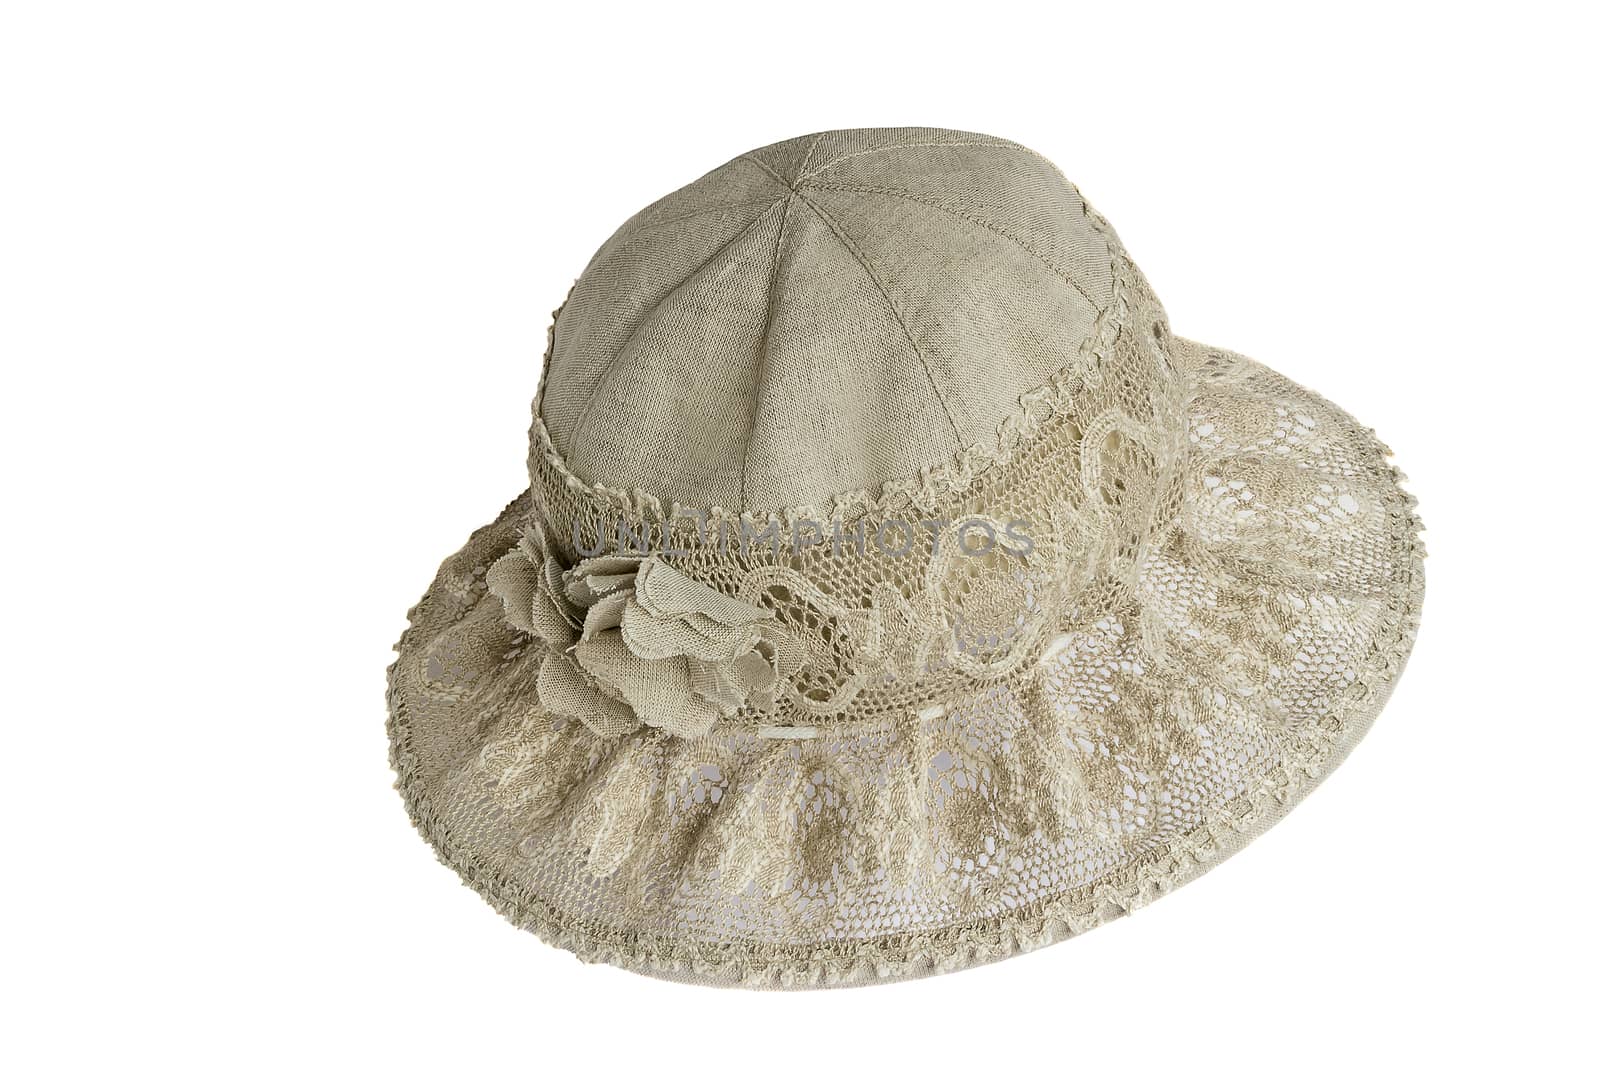 Female summer hat for protection against the sun on a white back by georgina198